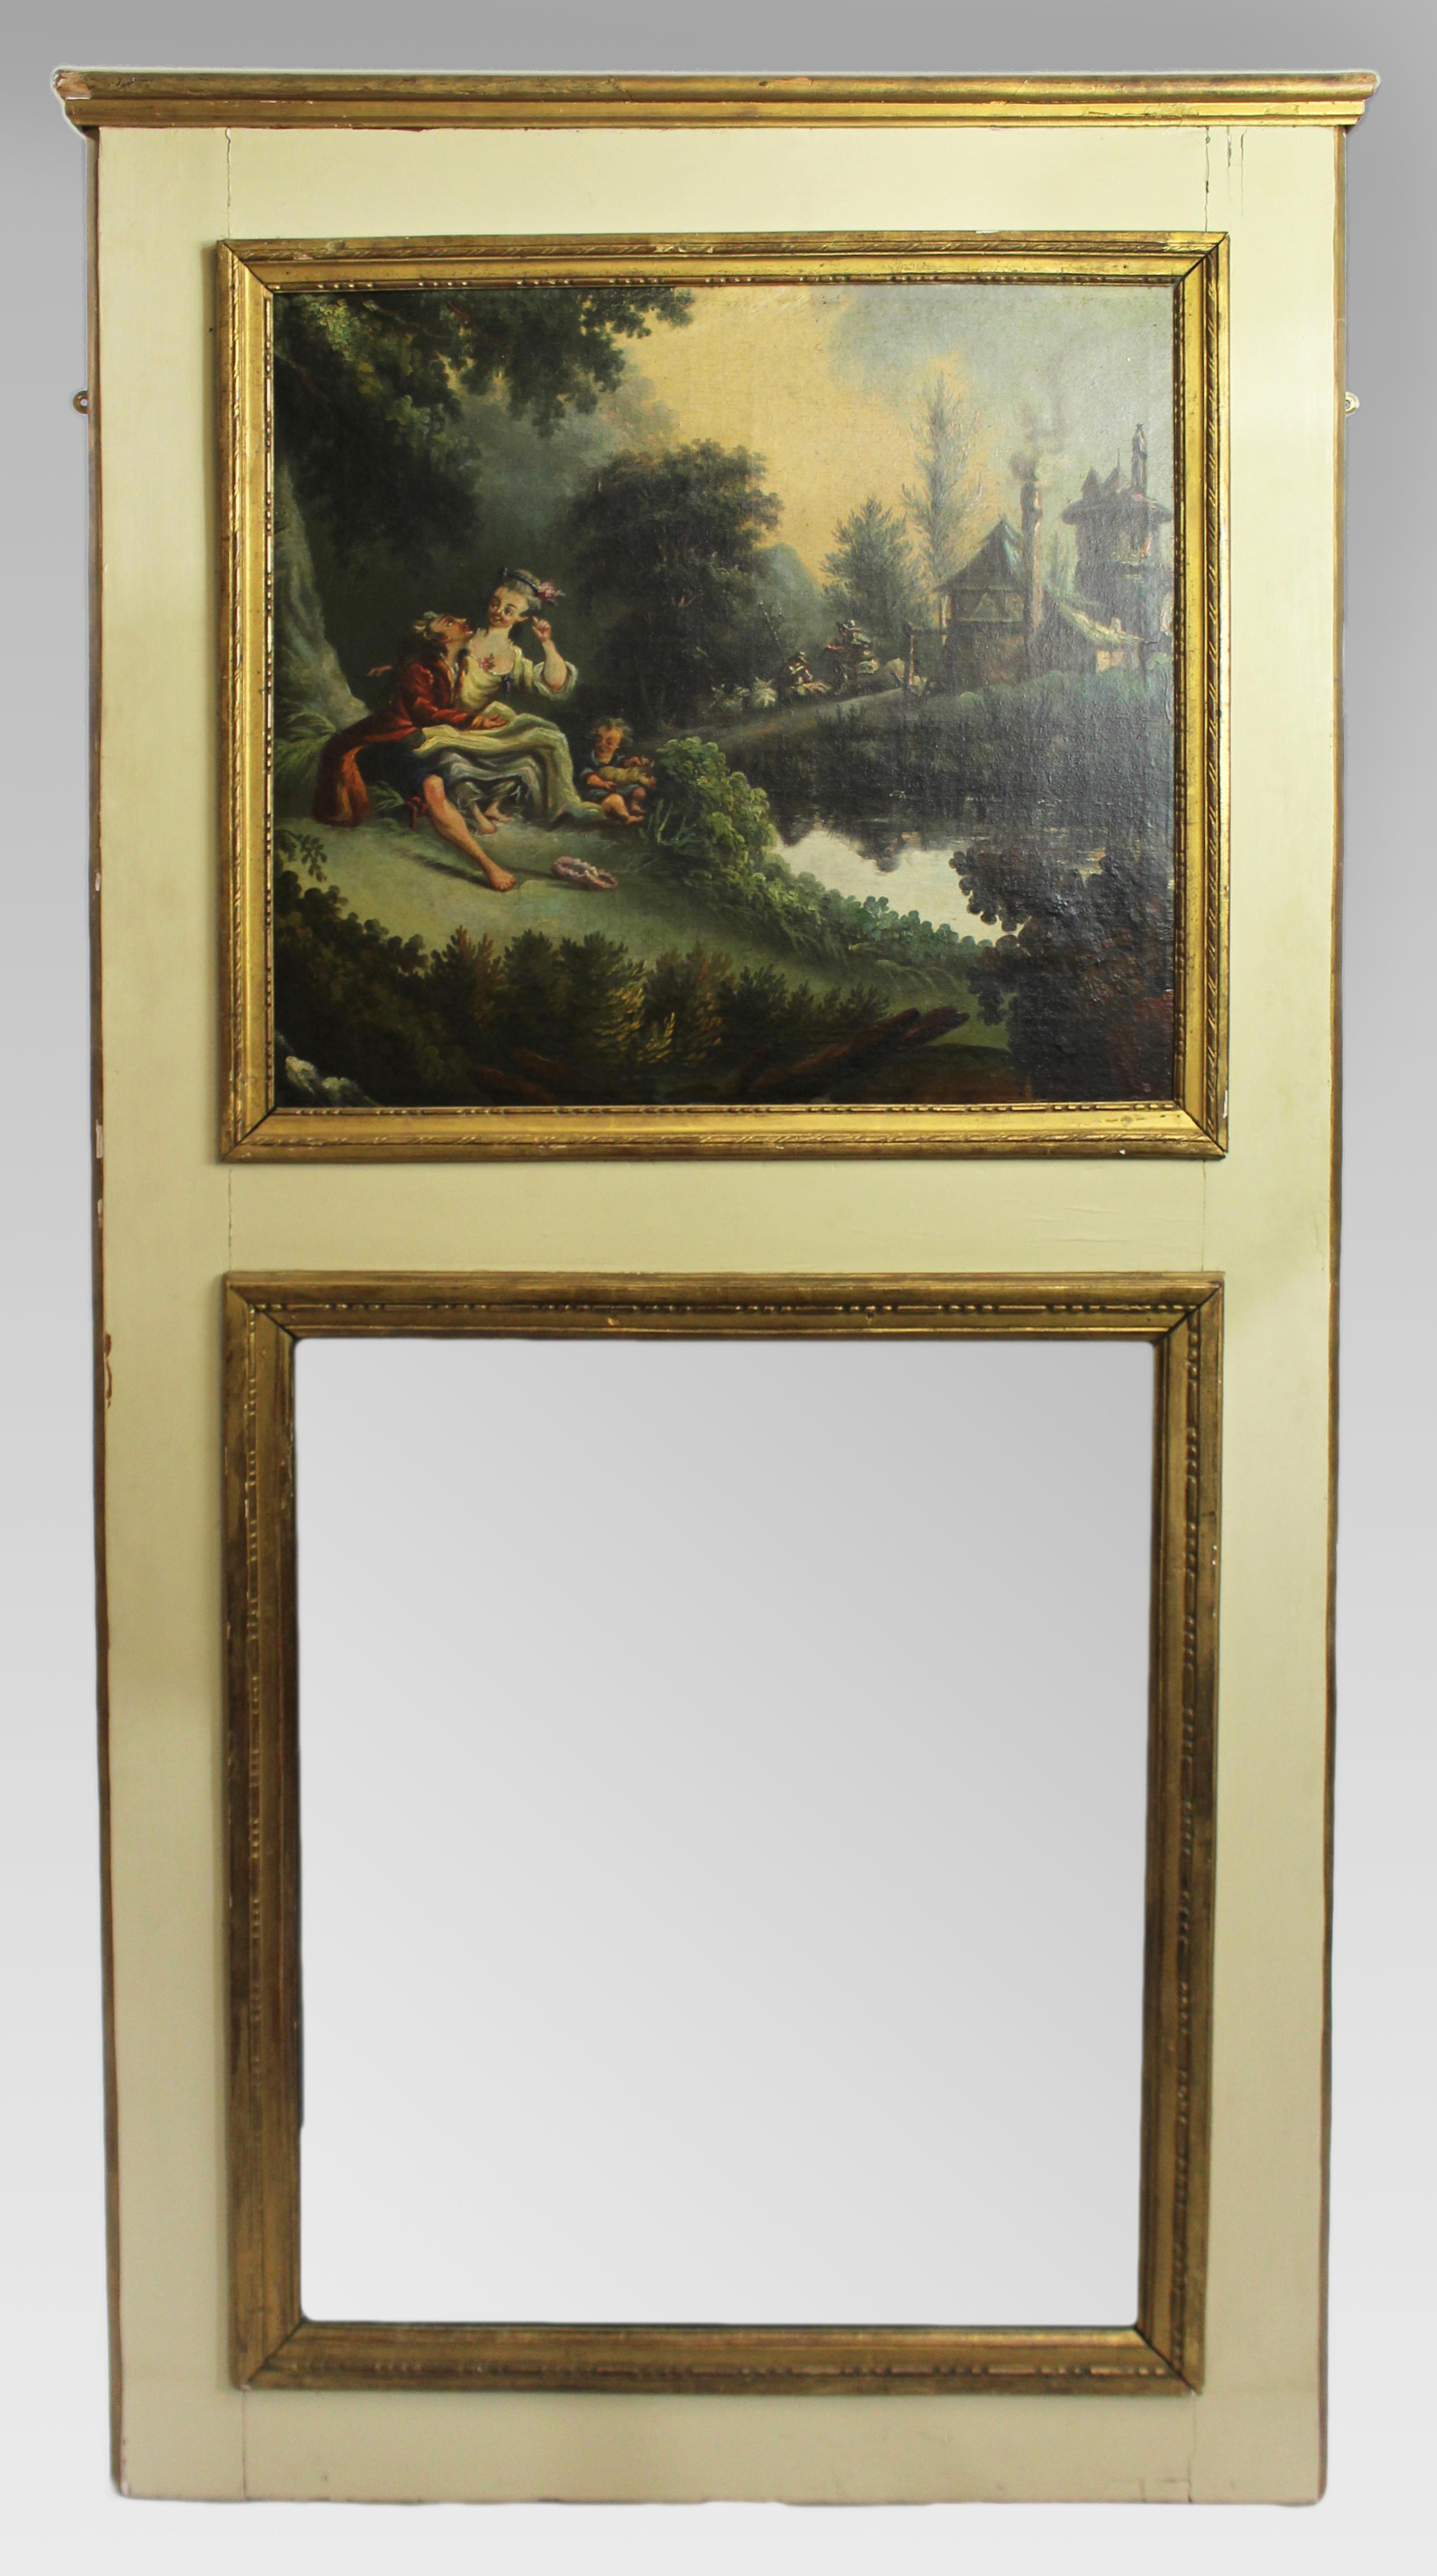 Tall French antique Chateau Trumeau mirror c.1890



Period Late 19th c., French

Decoration Carved wood with gilt plaster mouldings, oil on canvas above plate glass mirror

Condition Good condition commensurate with age. Some little aged